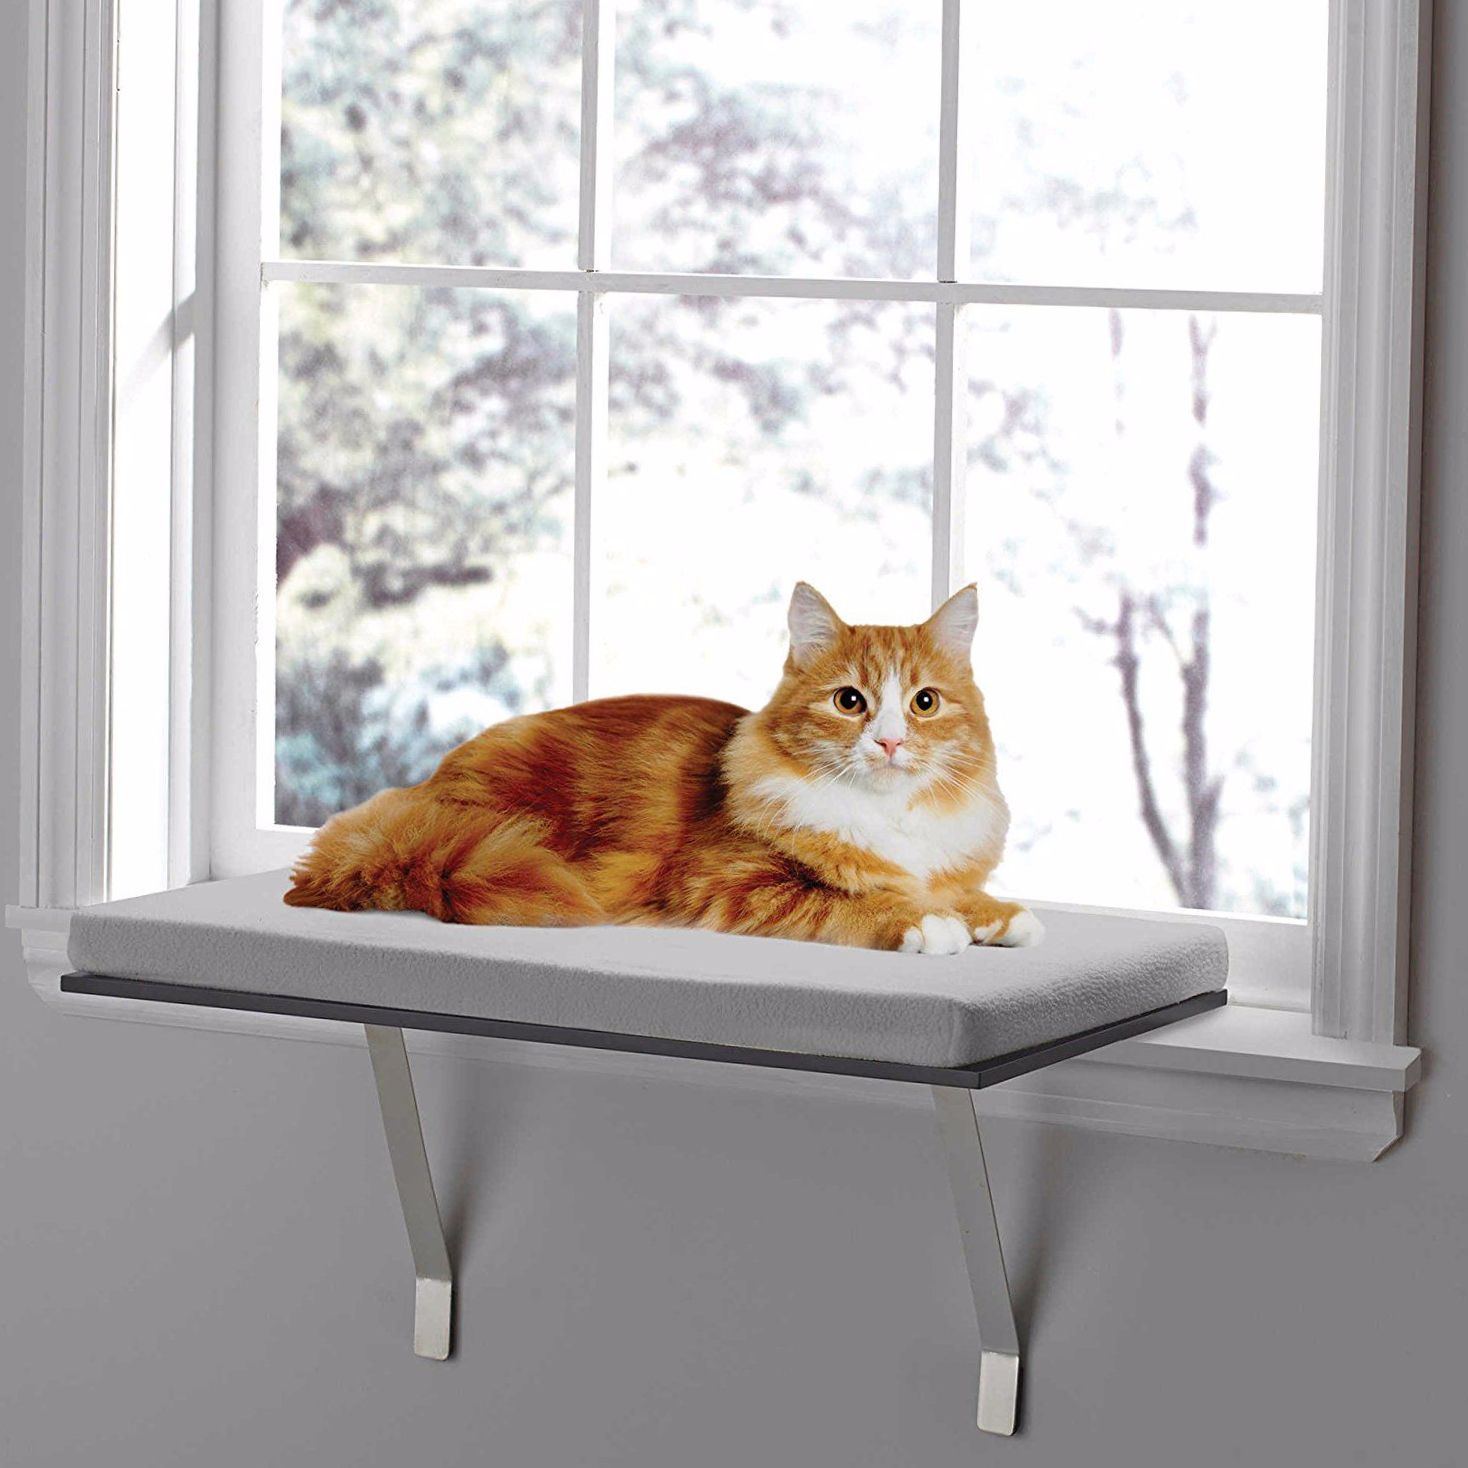 Deluxe Pet Cat Window Perch Seat Bed Kitty Shelf Mounted Hanging ...